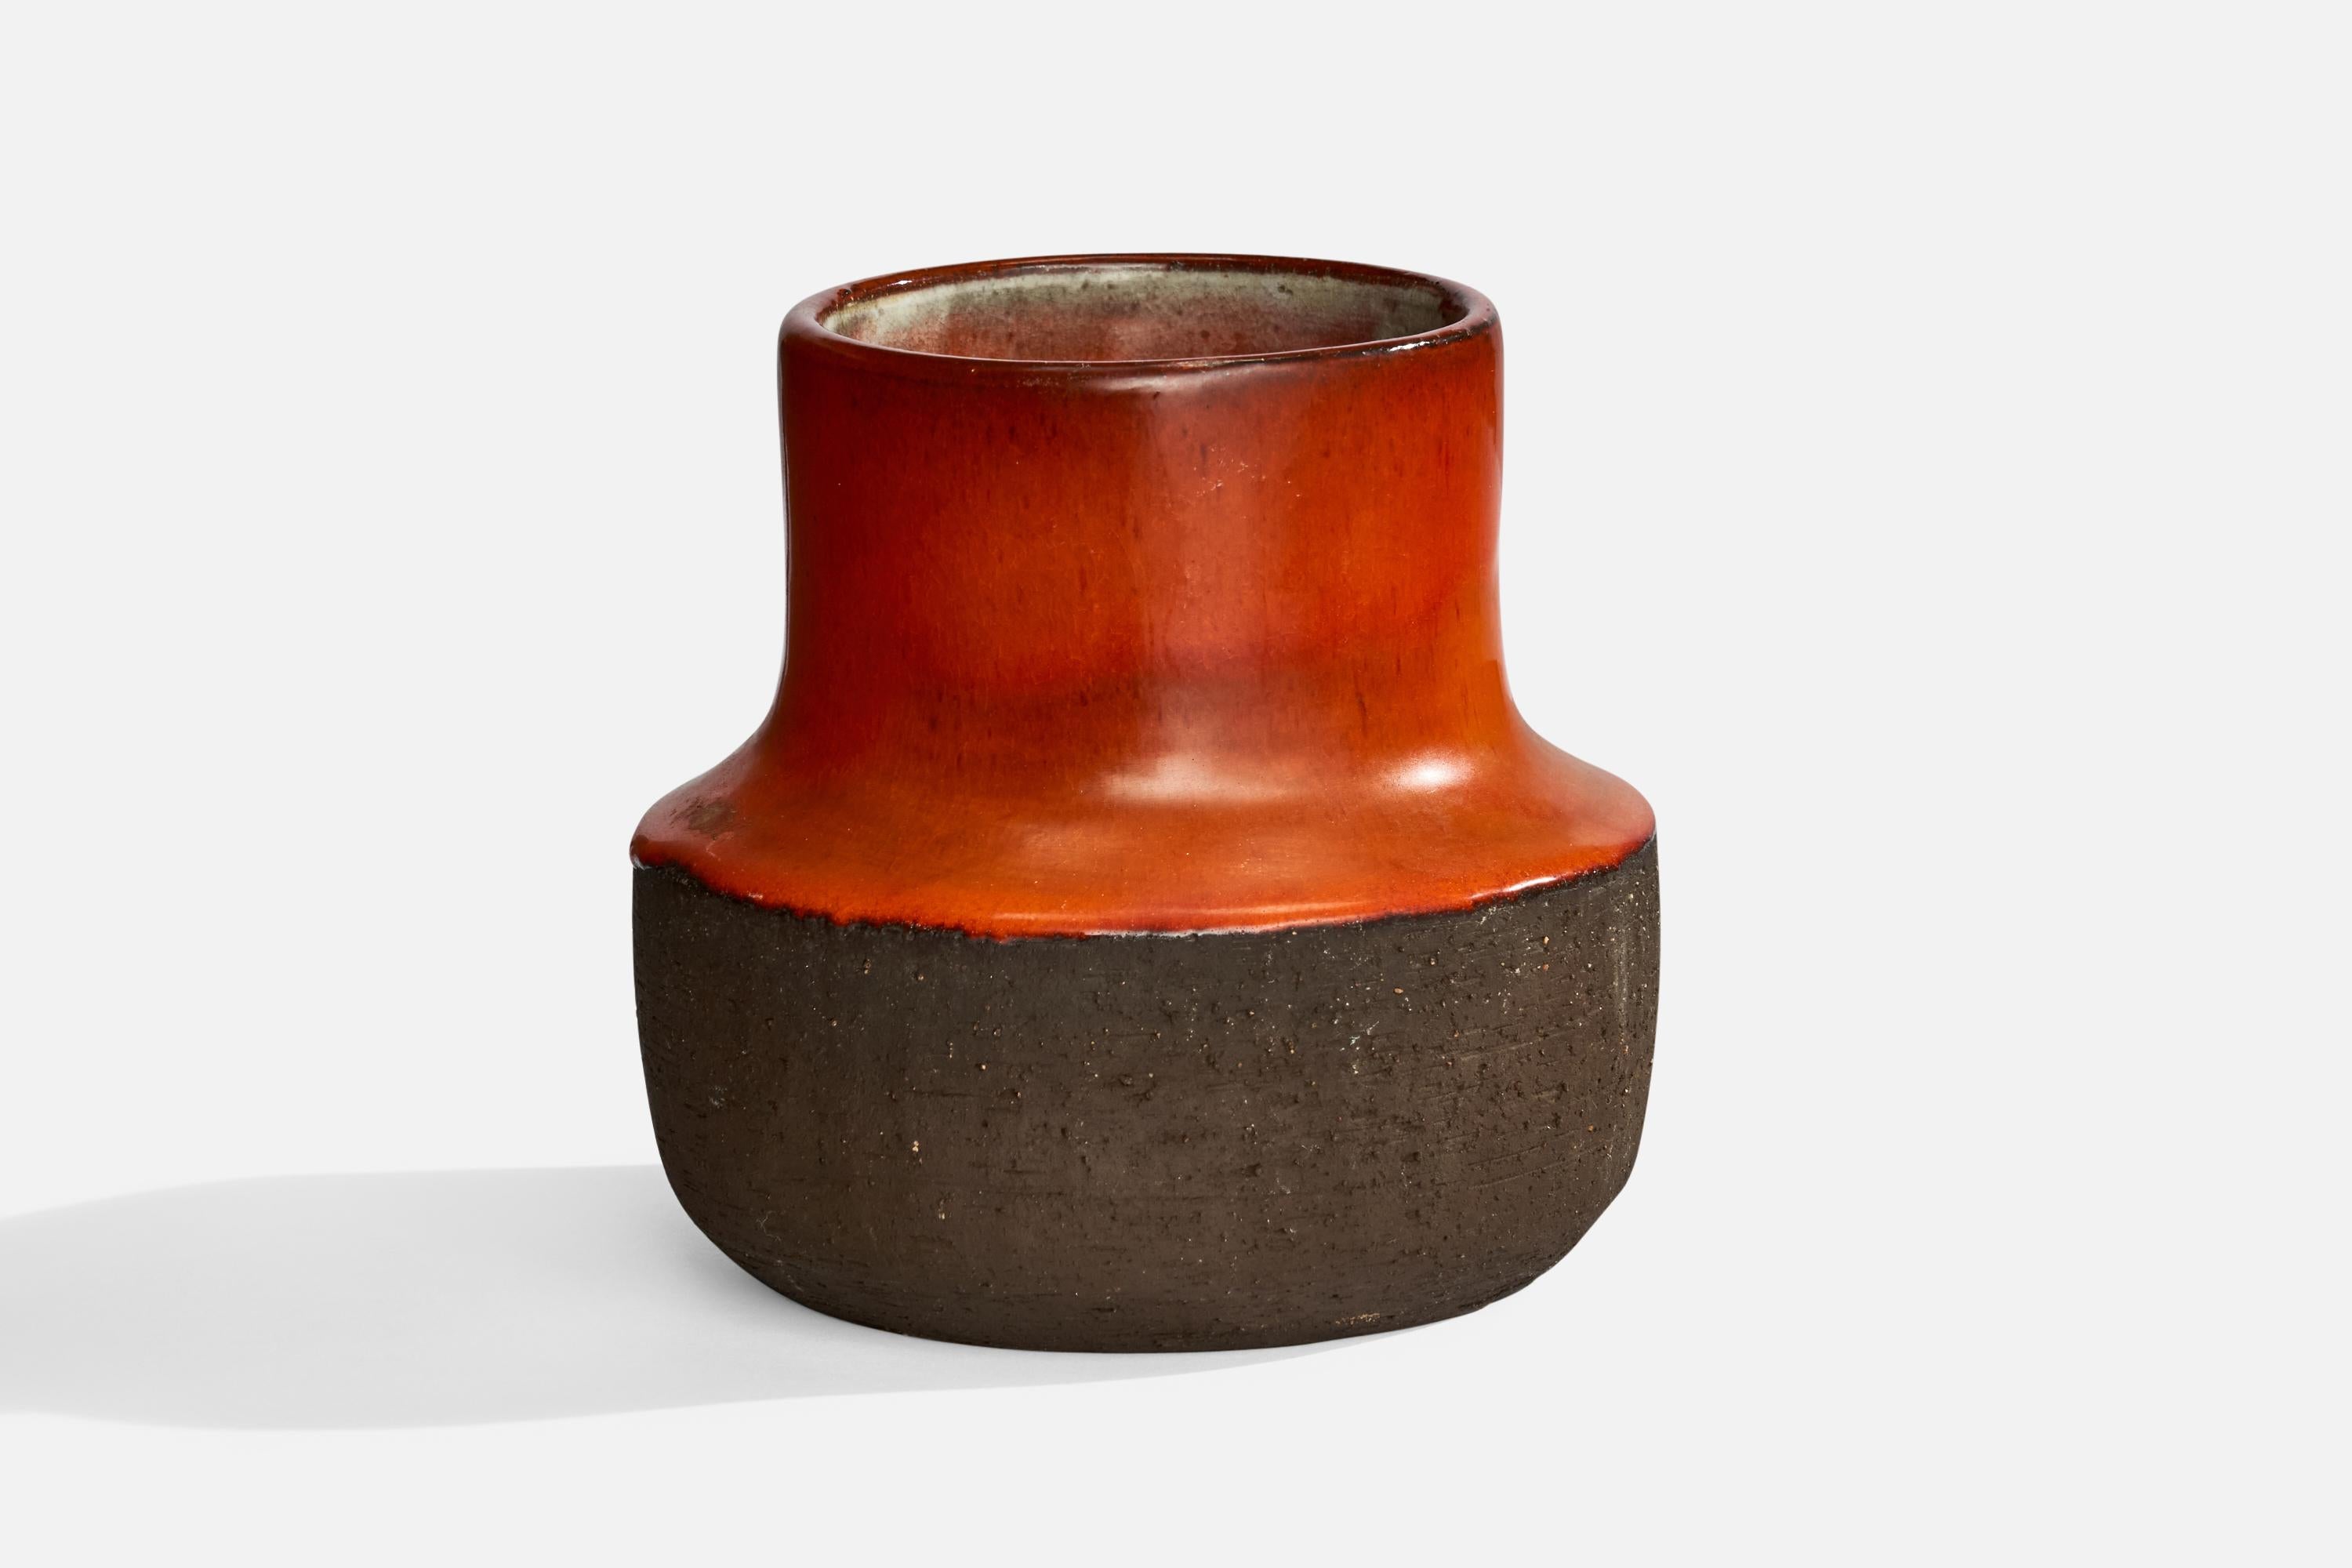 A red and dark-brown-glazed stoneware vase designed and produced by Løvemose, Denmark, 1960s